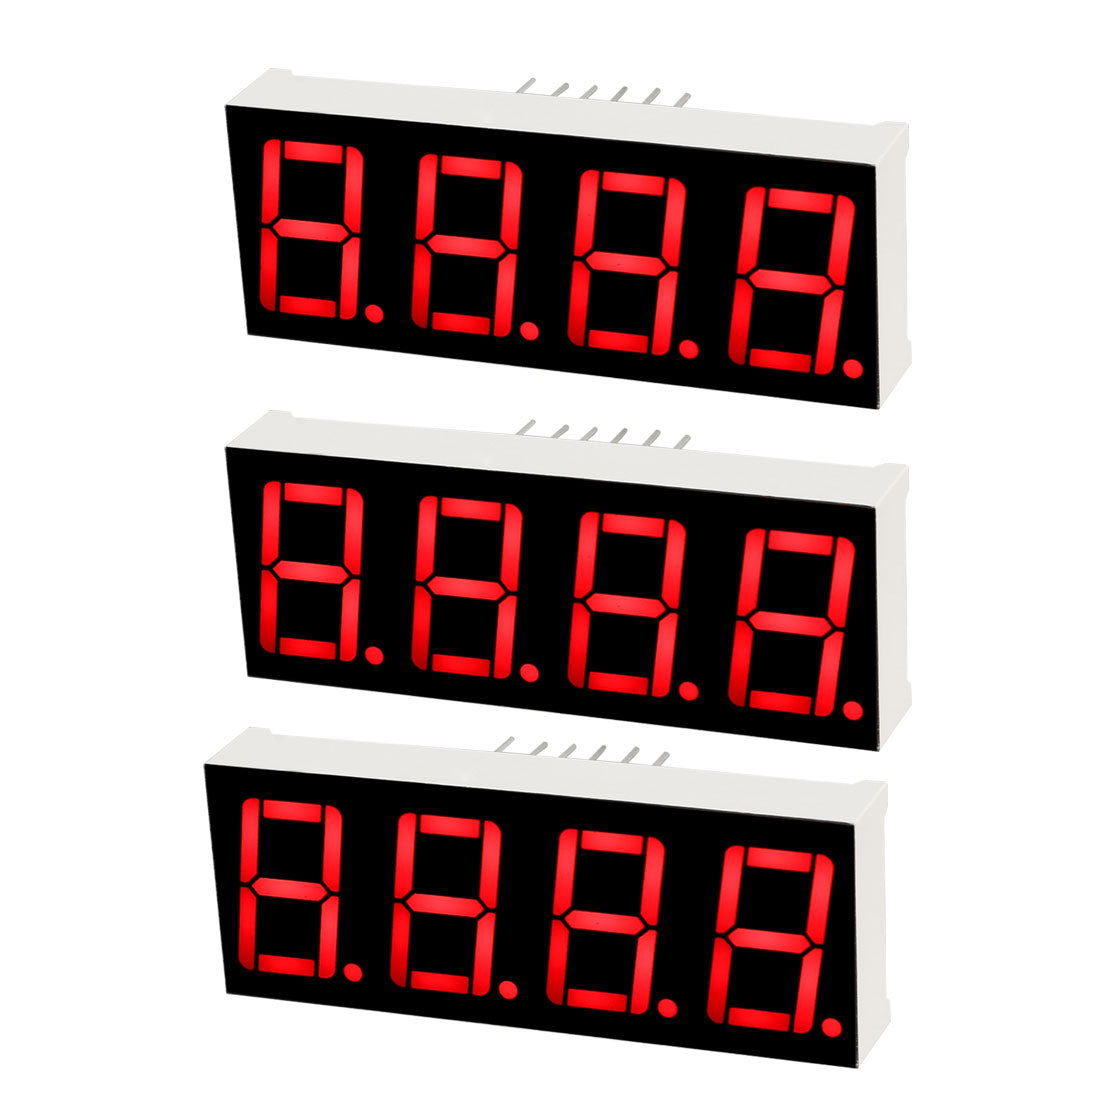 uxcell Uxcell Common Cathode 12Pin 4 Bit 7 Segment 1.98 x 0.75 x 0.31 Inch 0.55" Red LED Display Digital Tube 3pcs